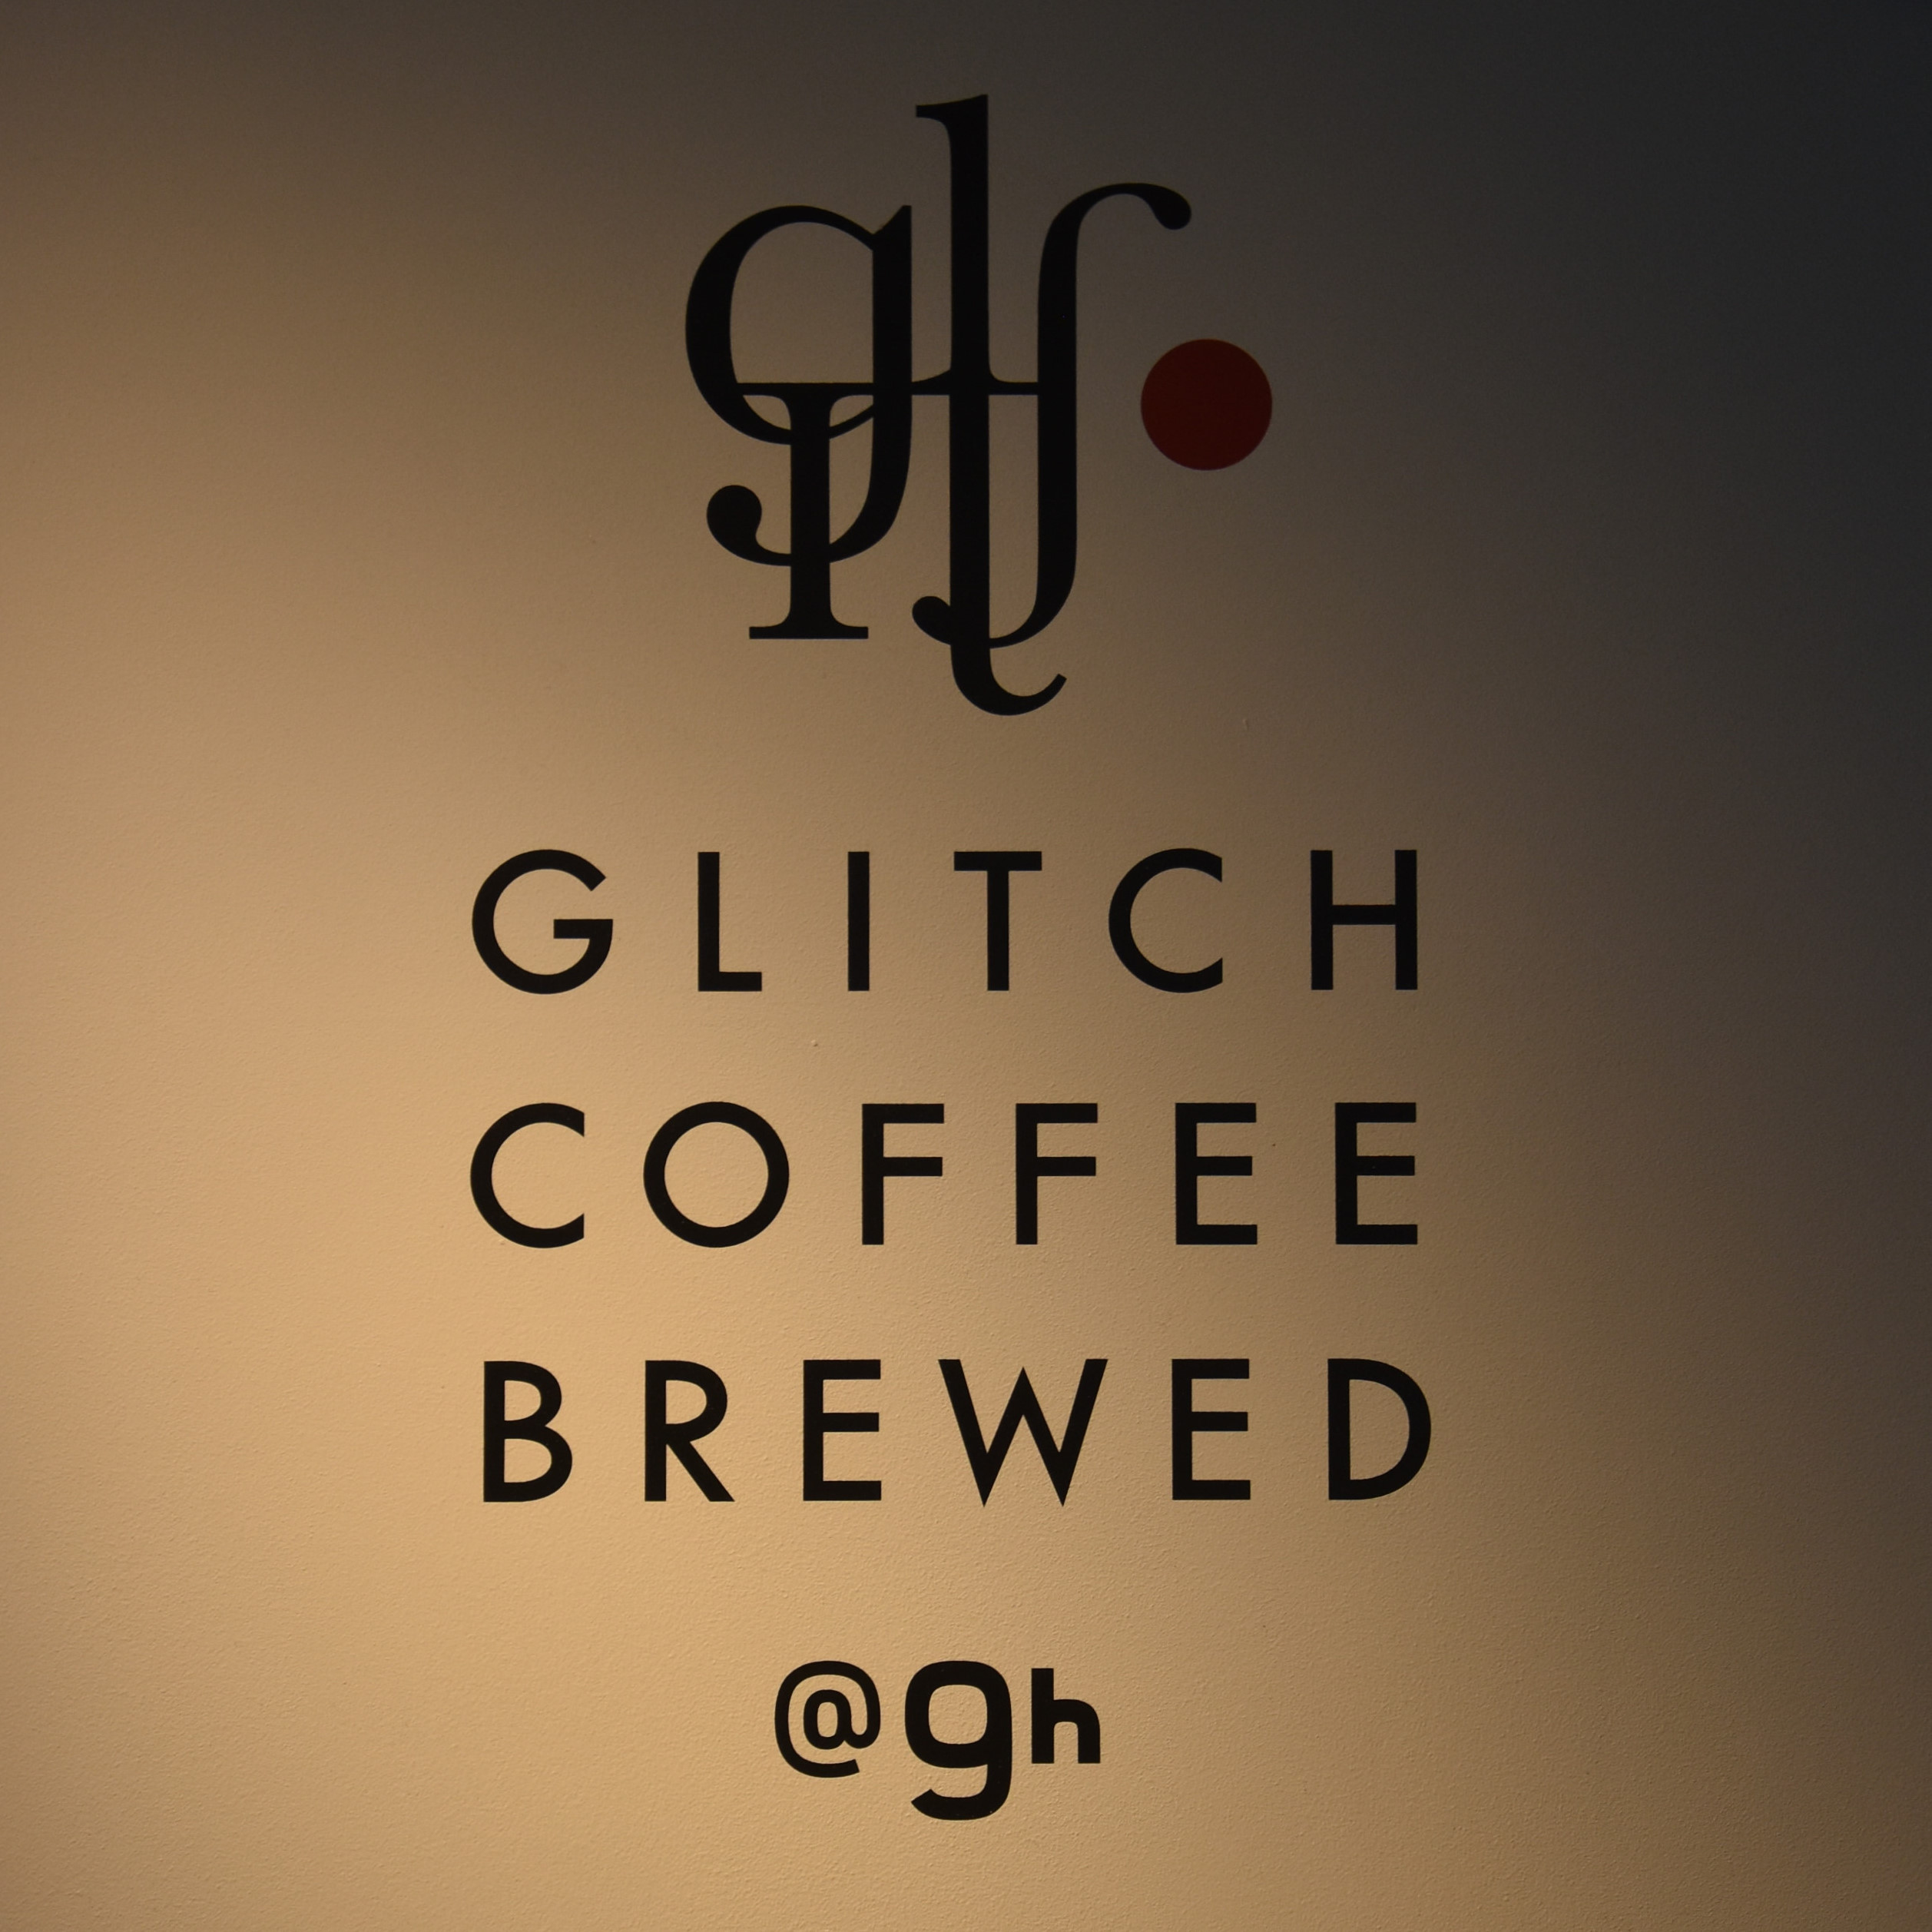 Glitch Coffee Brewed, from the wall behind the counter, with the Glitch Coffee logo above and the Nine Hours hotel logo below.